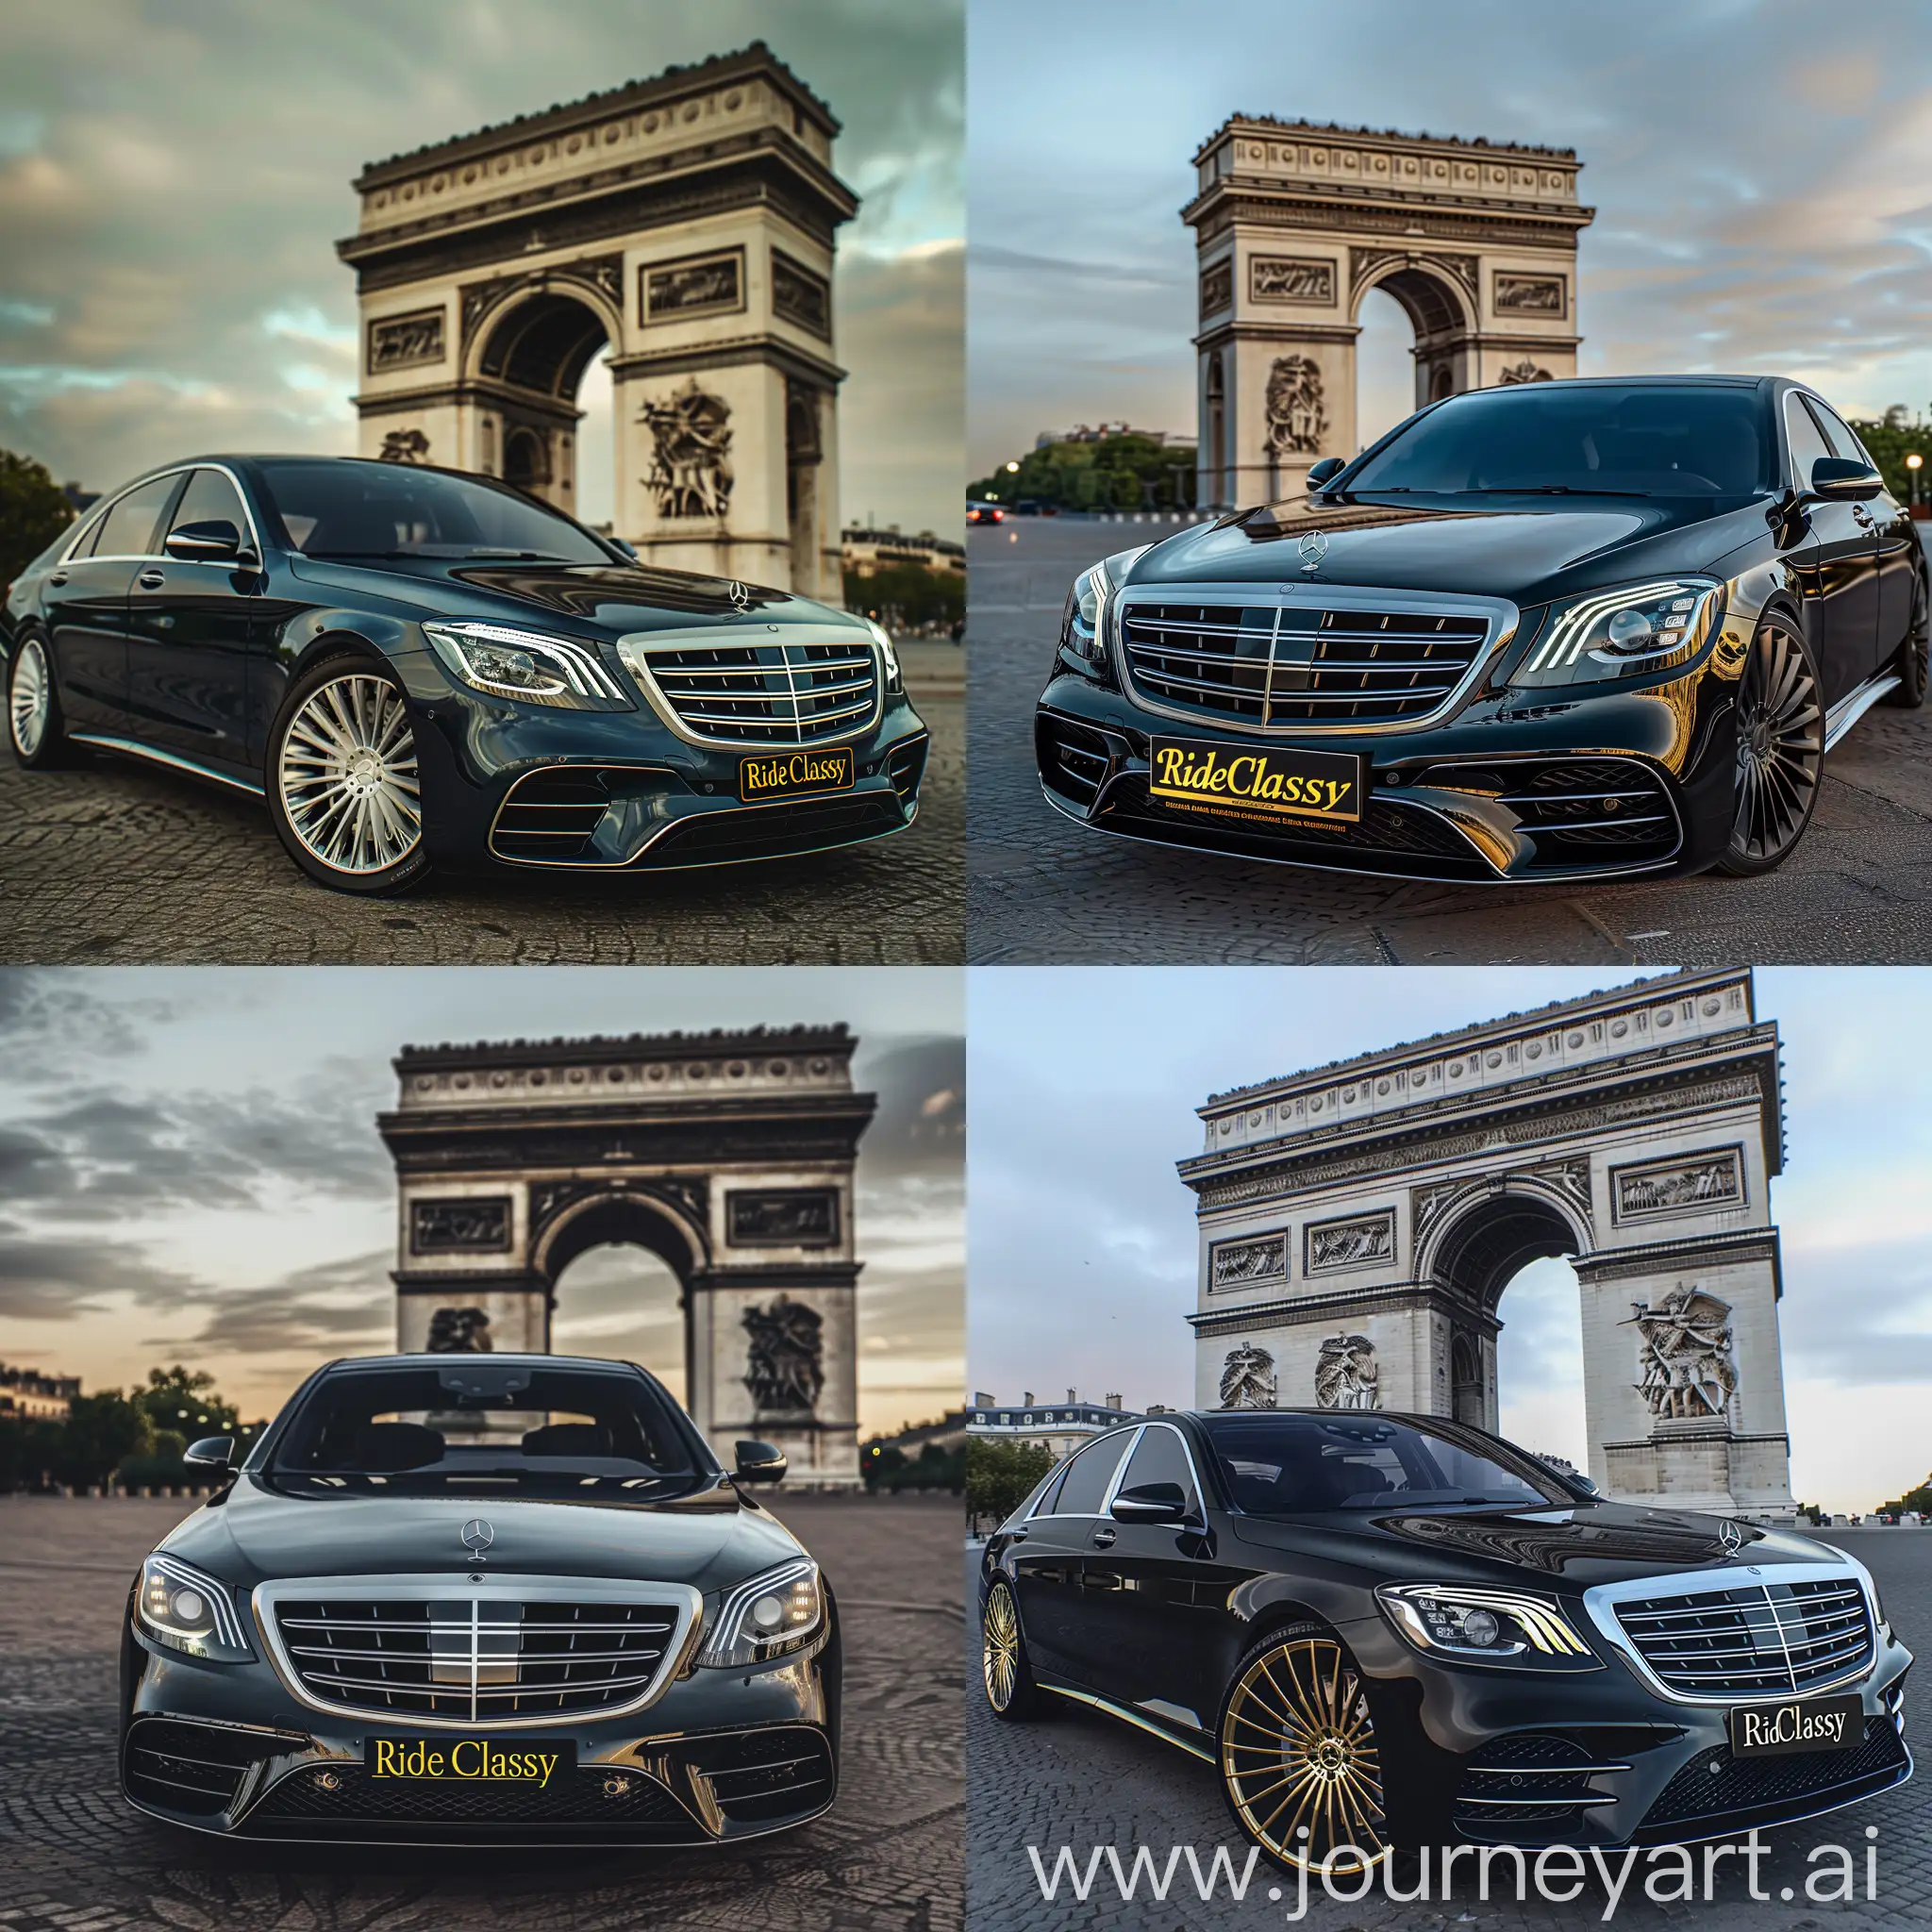 Luxury-Black-SClass-Parked-at-Arc-de-Triomf-with-Gold-RideClassy-Plate